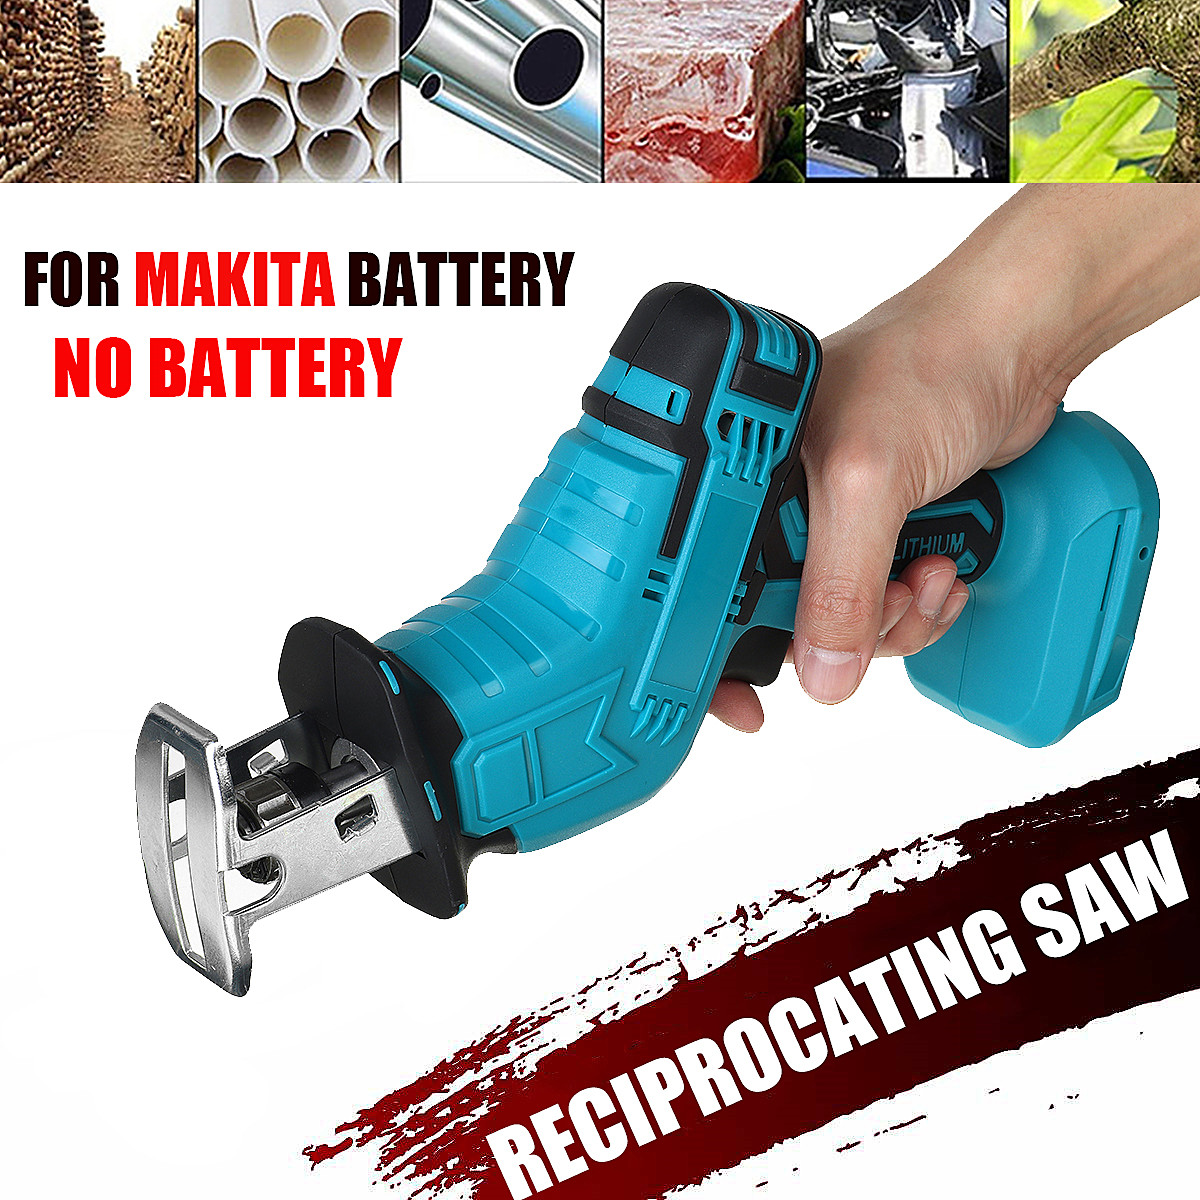 Cordless-Reciprocating-Saw-Portable-Electric-Saw-Wood-Cutting-Tool-For-Makita-18V-Battery-1786908-1